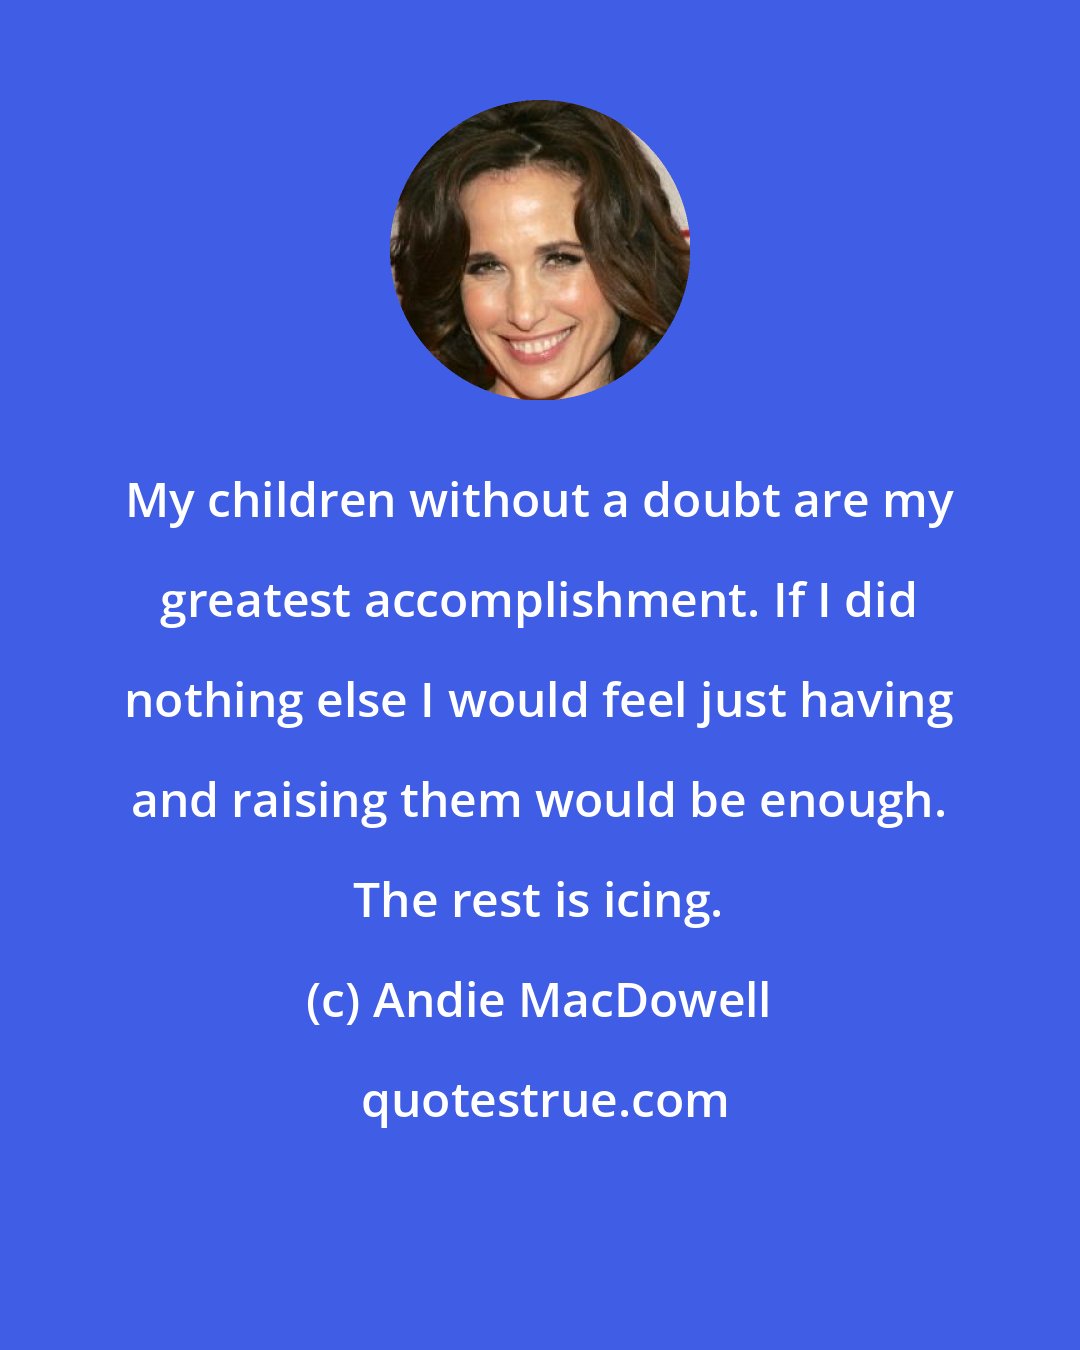 Andie MacDowell: My children without a doubt are my greatest accomplishment. If I did nothing else I would feel just having and raising them would be enough. The rest is icing.